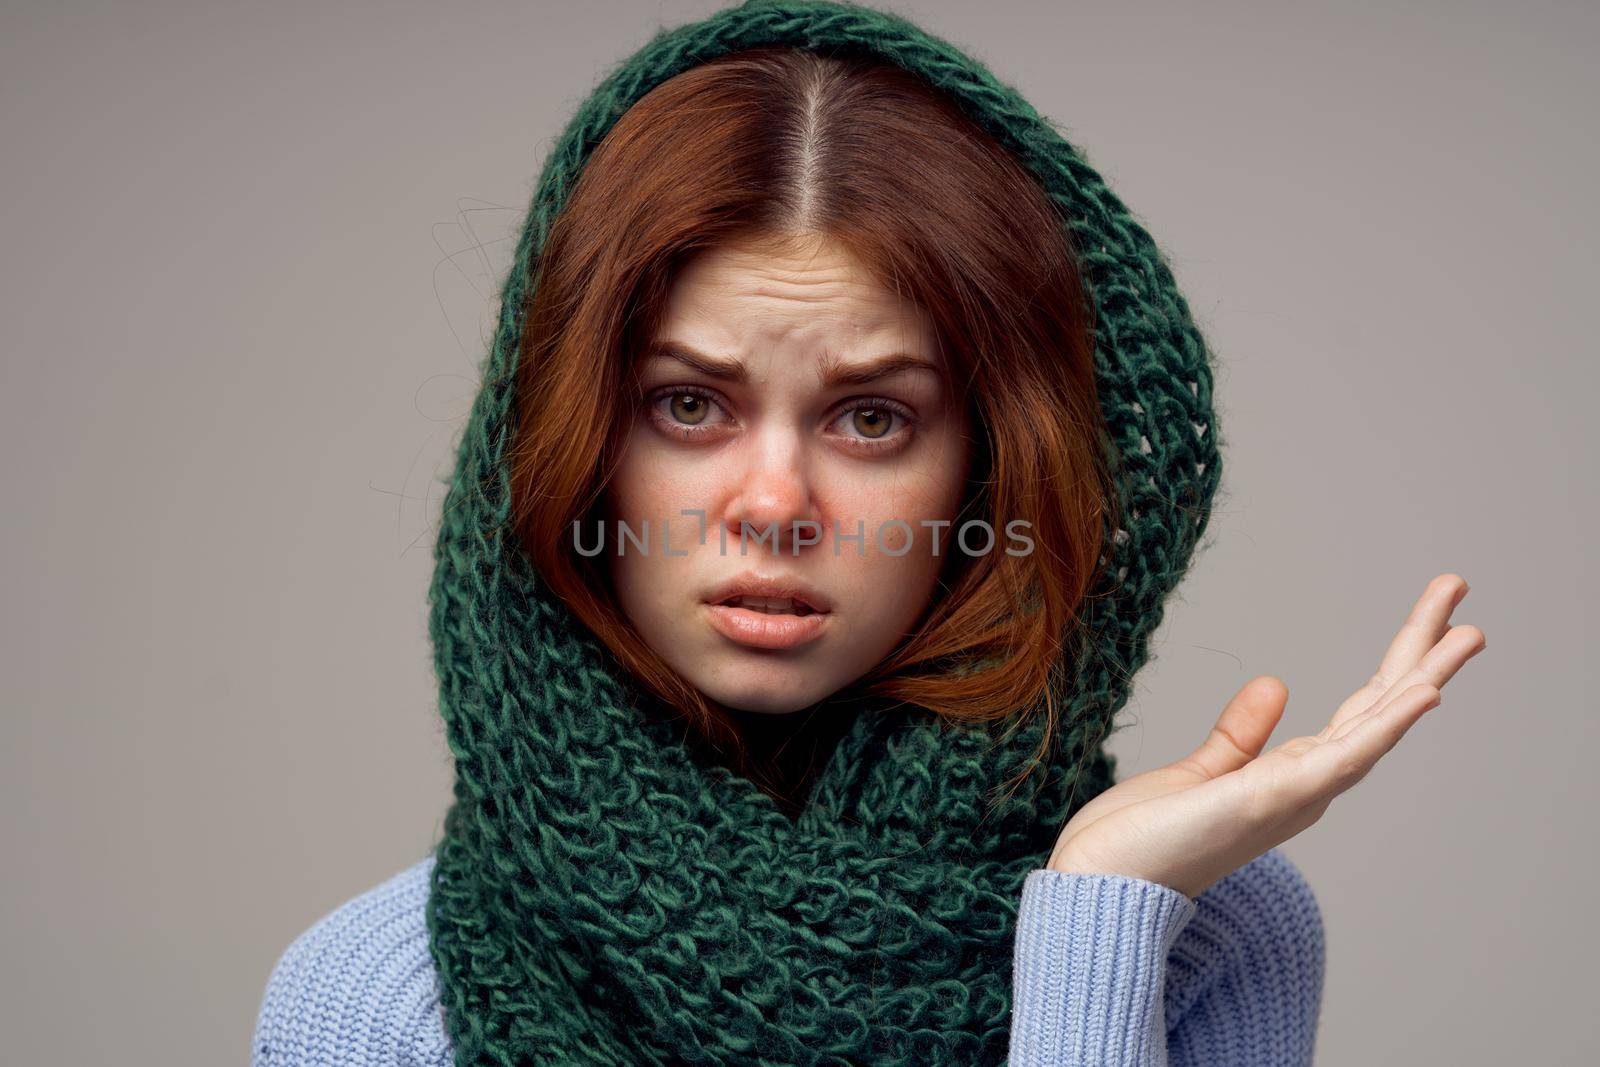 woman health problems temperature light background. High quality photo